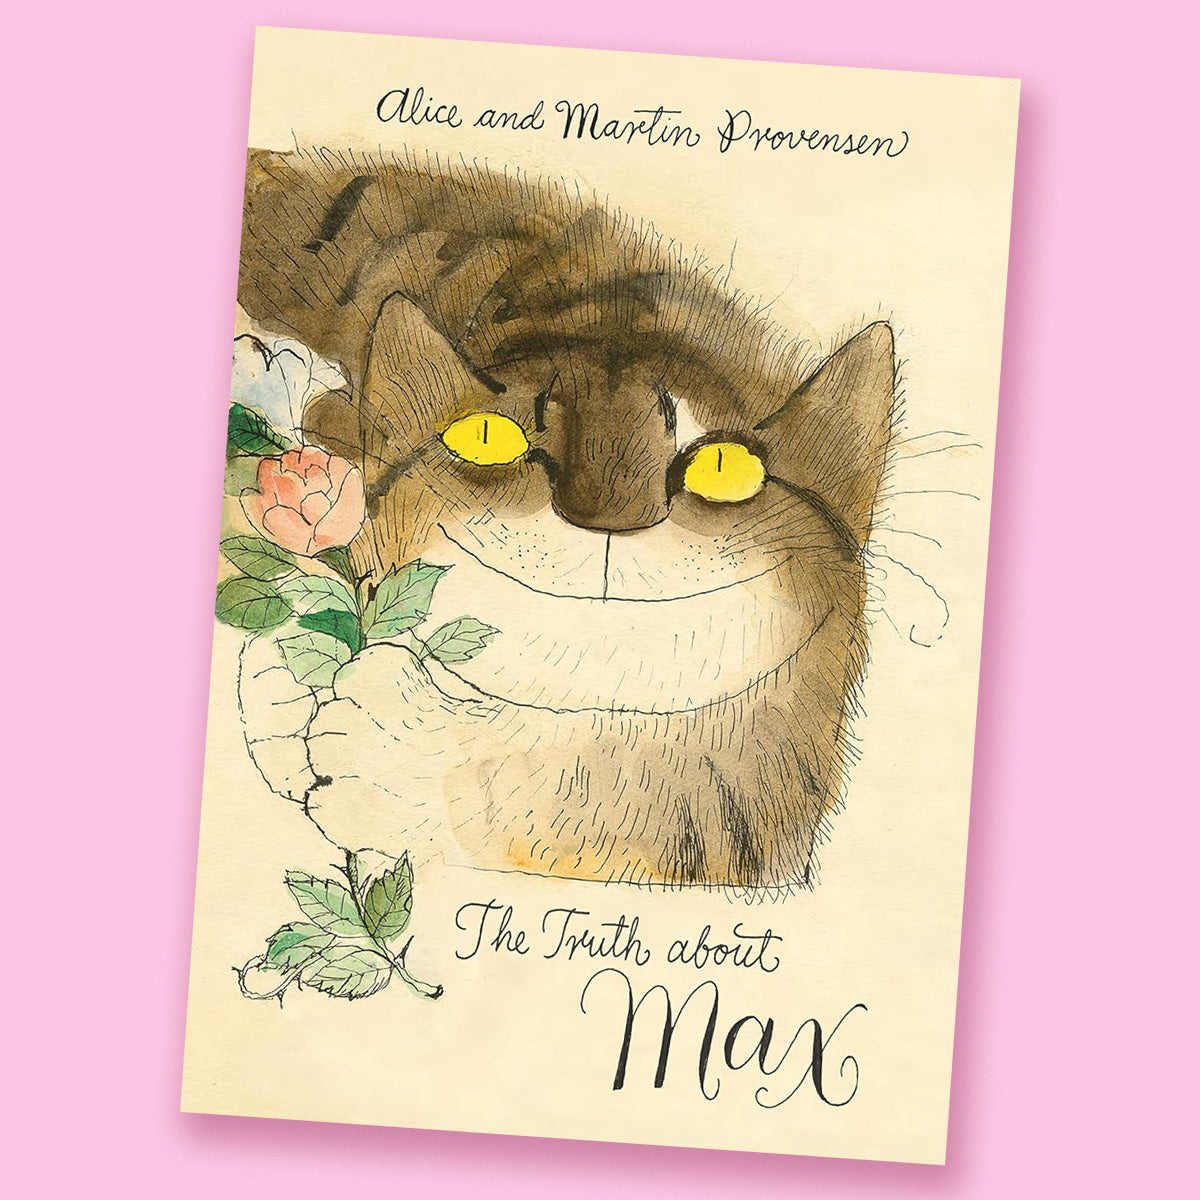 The Truth about Max by Alice Provensen and Martin Provensen